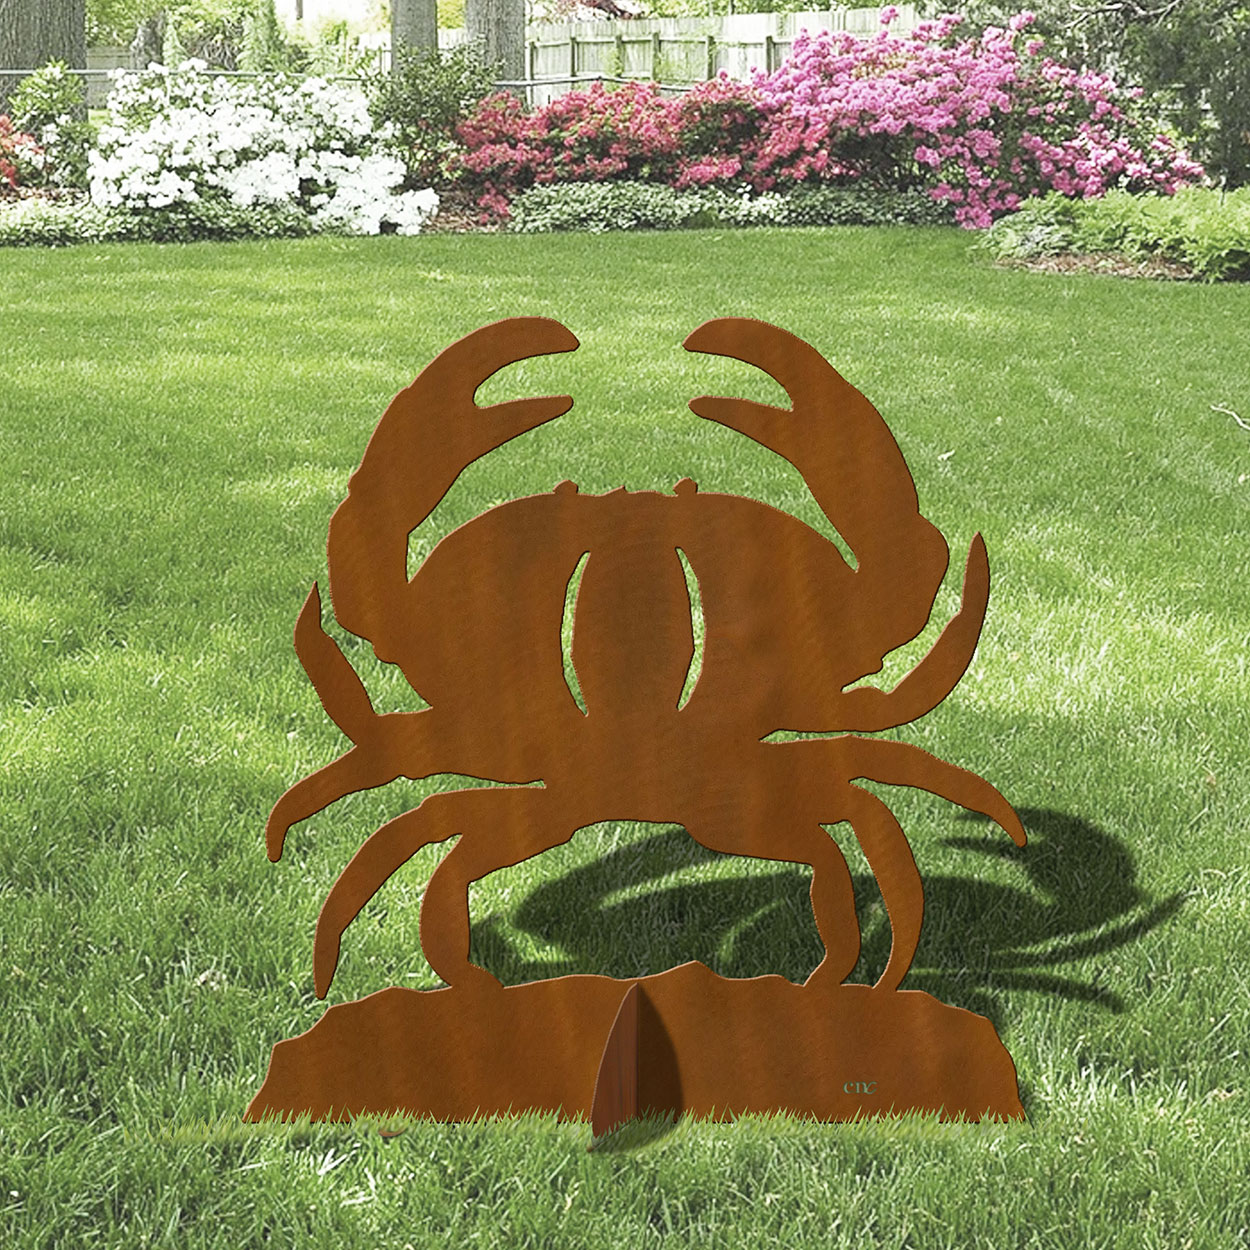 603264 - 36in H Crab Large Metal Lawn Ornament in Rust Patina